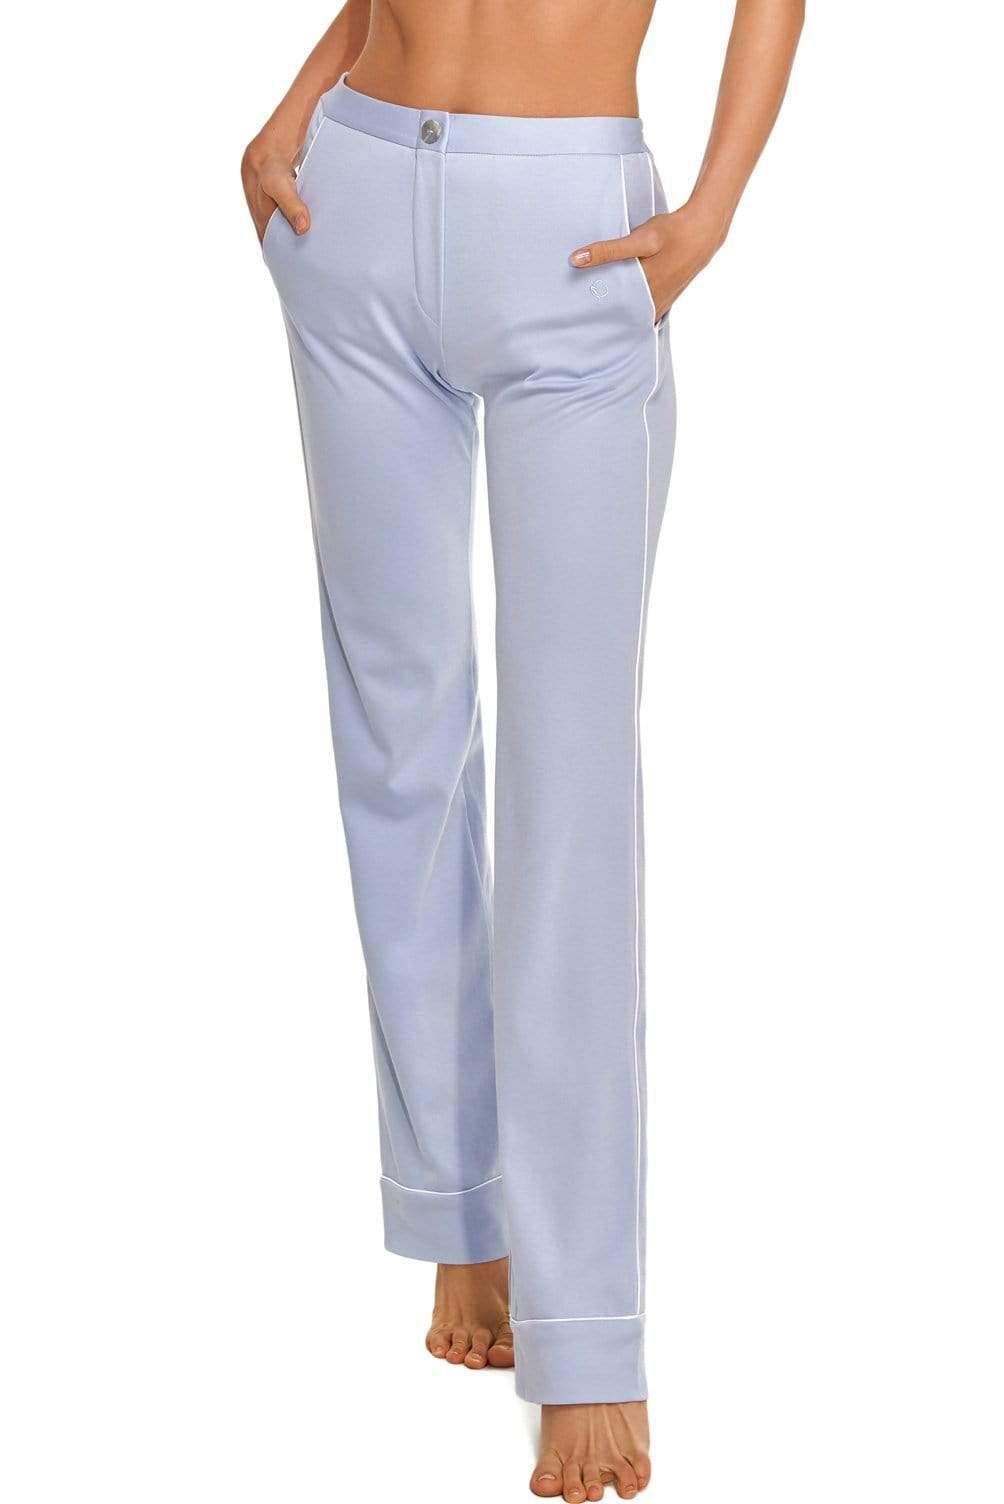 Buy Elley | Women Cotton Trousers | Black & White Trousers XL-34 | Cotton  Solid Regular Fit Pants | Women Formal/Casual Wear Trousers (Pack of 2) at  Amazon.in